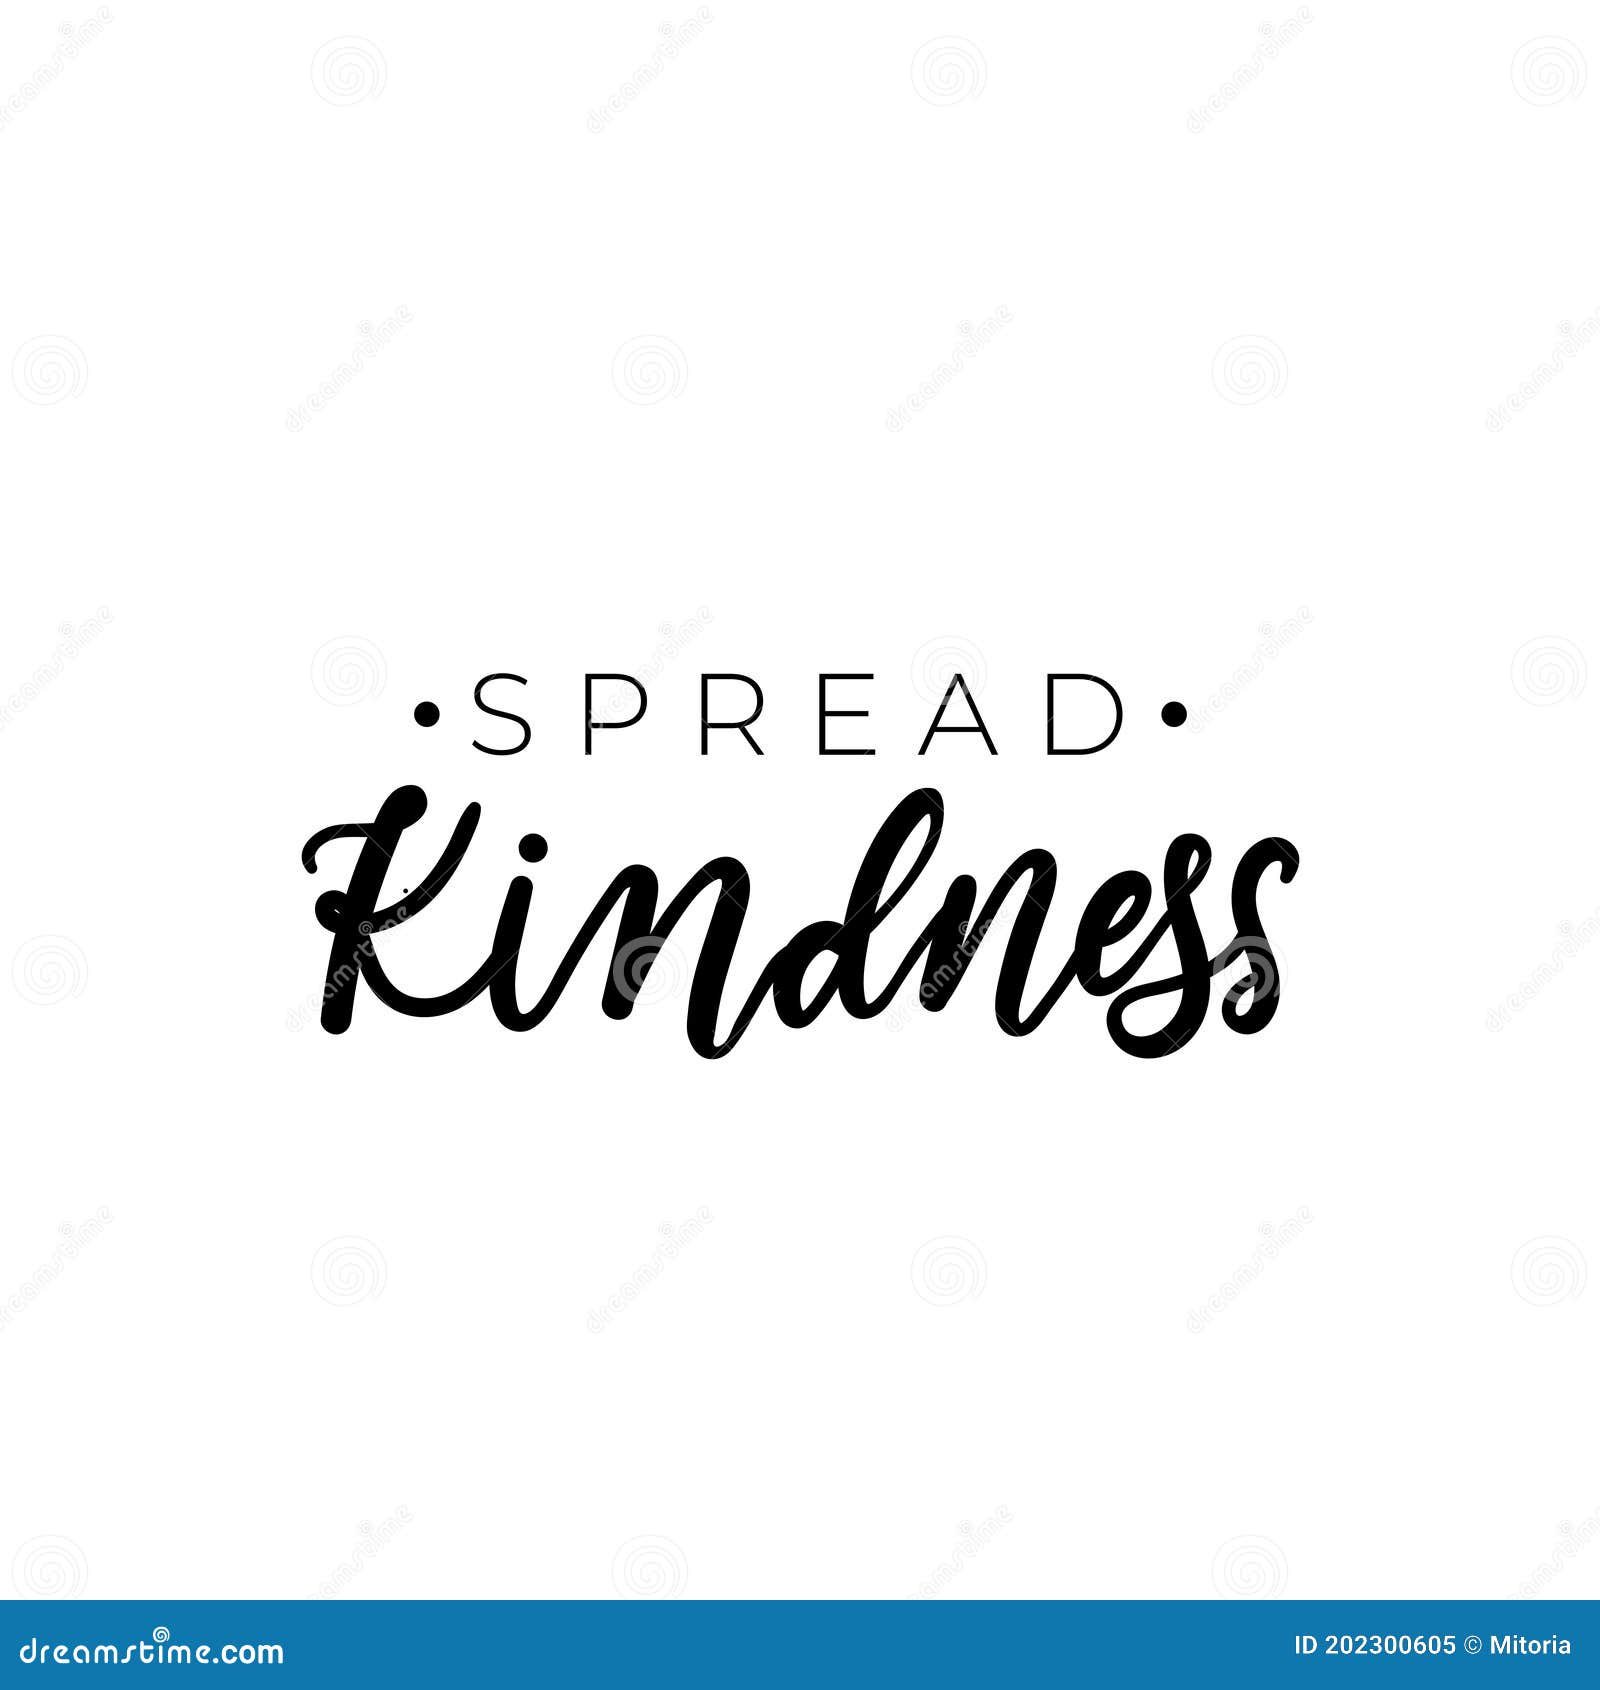 spread kindness simple  with typography and hand drawn s. be kind motivational and inspirational print